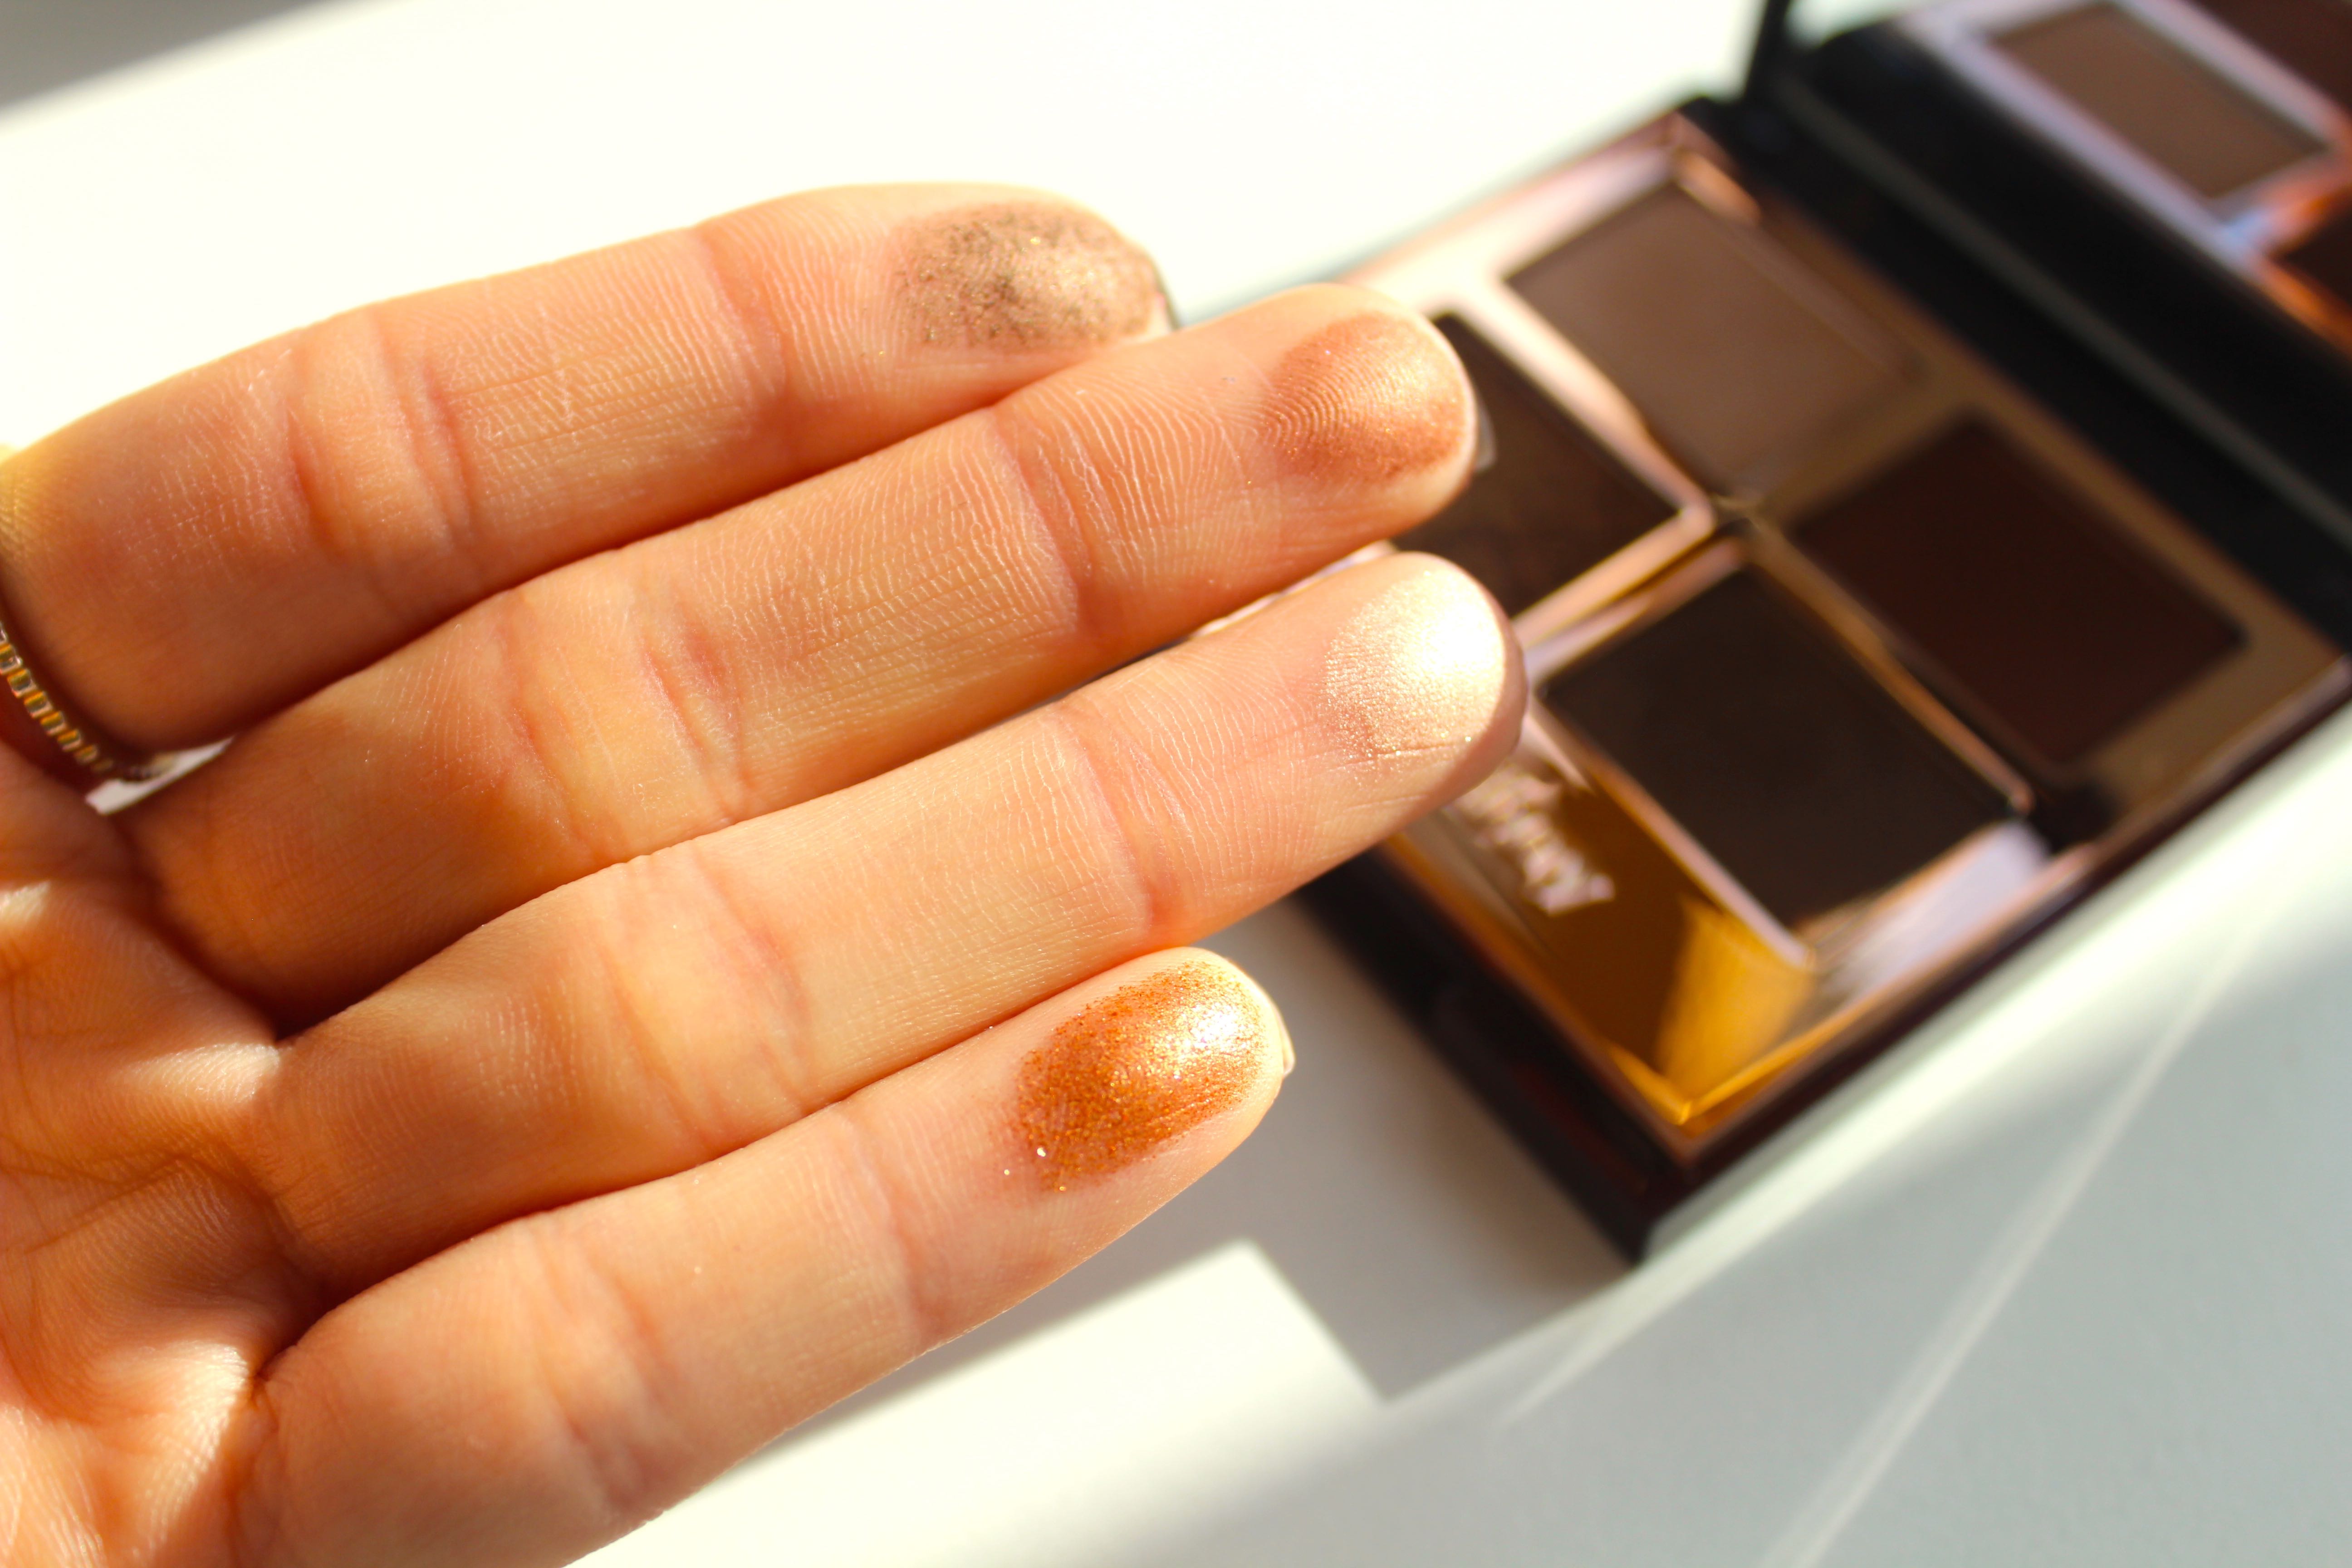 Charlotte-Tilbury-Haul-and-product-review-all-in-one-Luxury-palette-The-Dolce-Vita-in-daylight-by-face-made-up-facemadeup